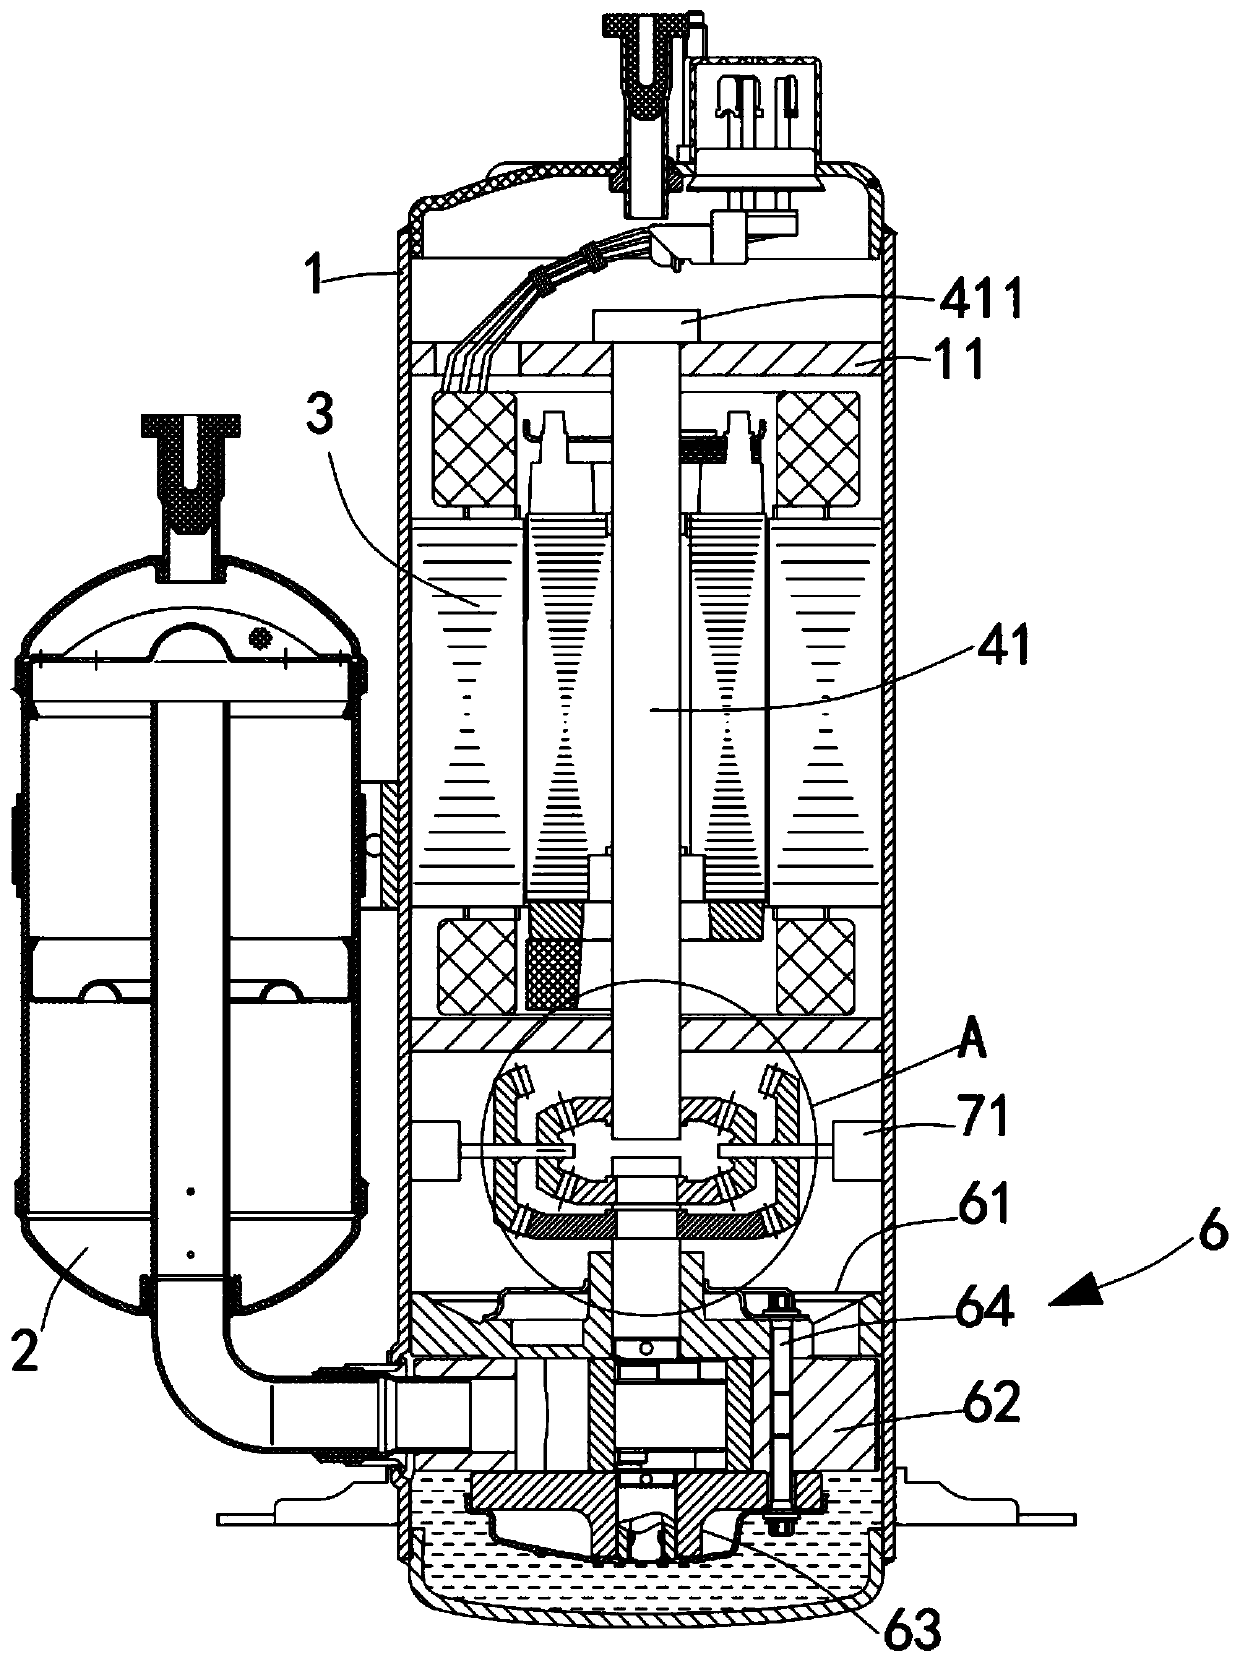 Variable-speed compressor and air conditioner